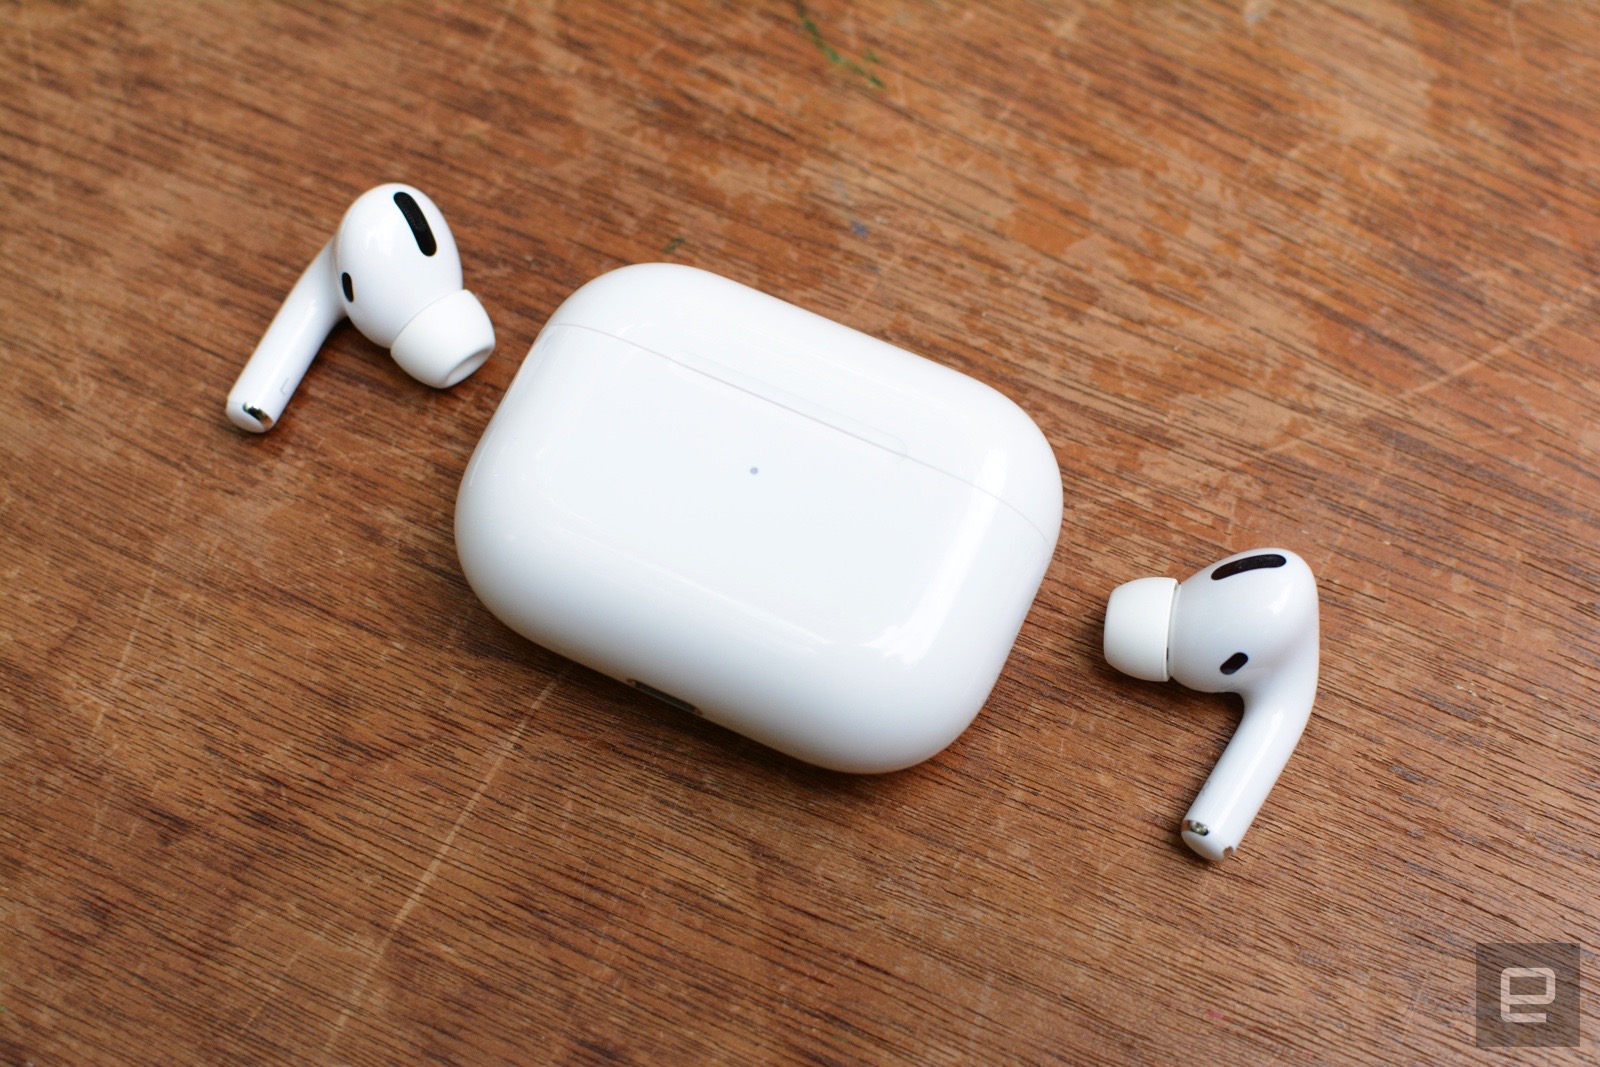 AirPods Pro are at their lowest Amazon price ever